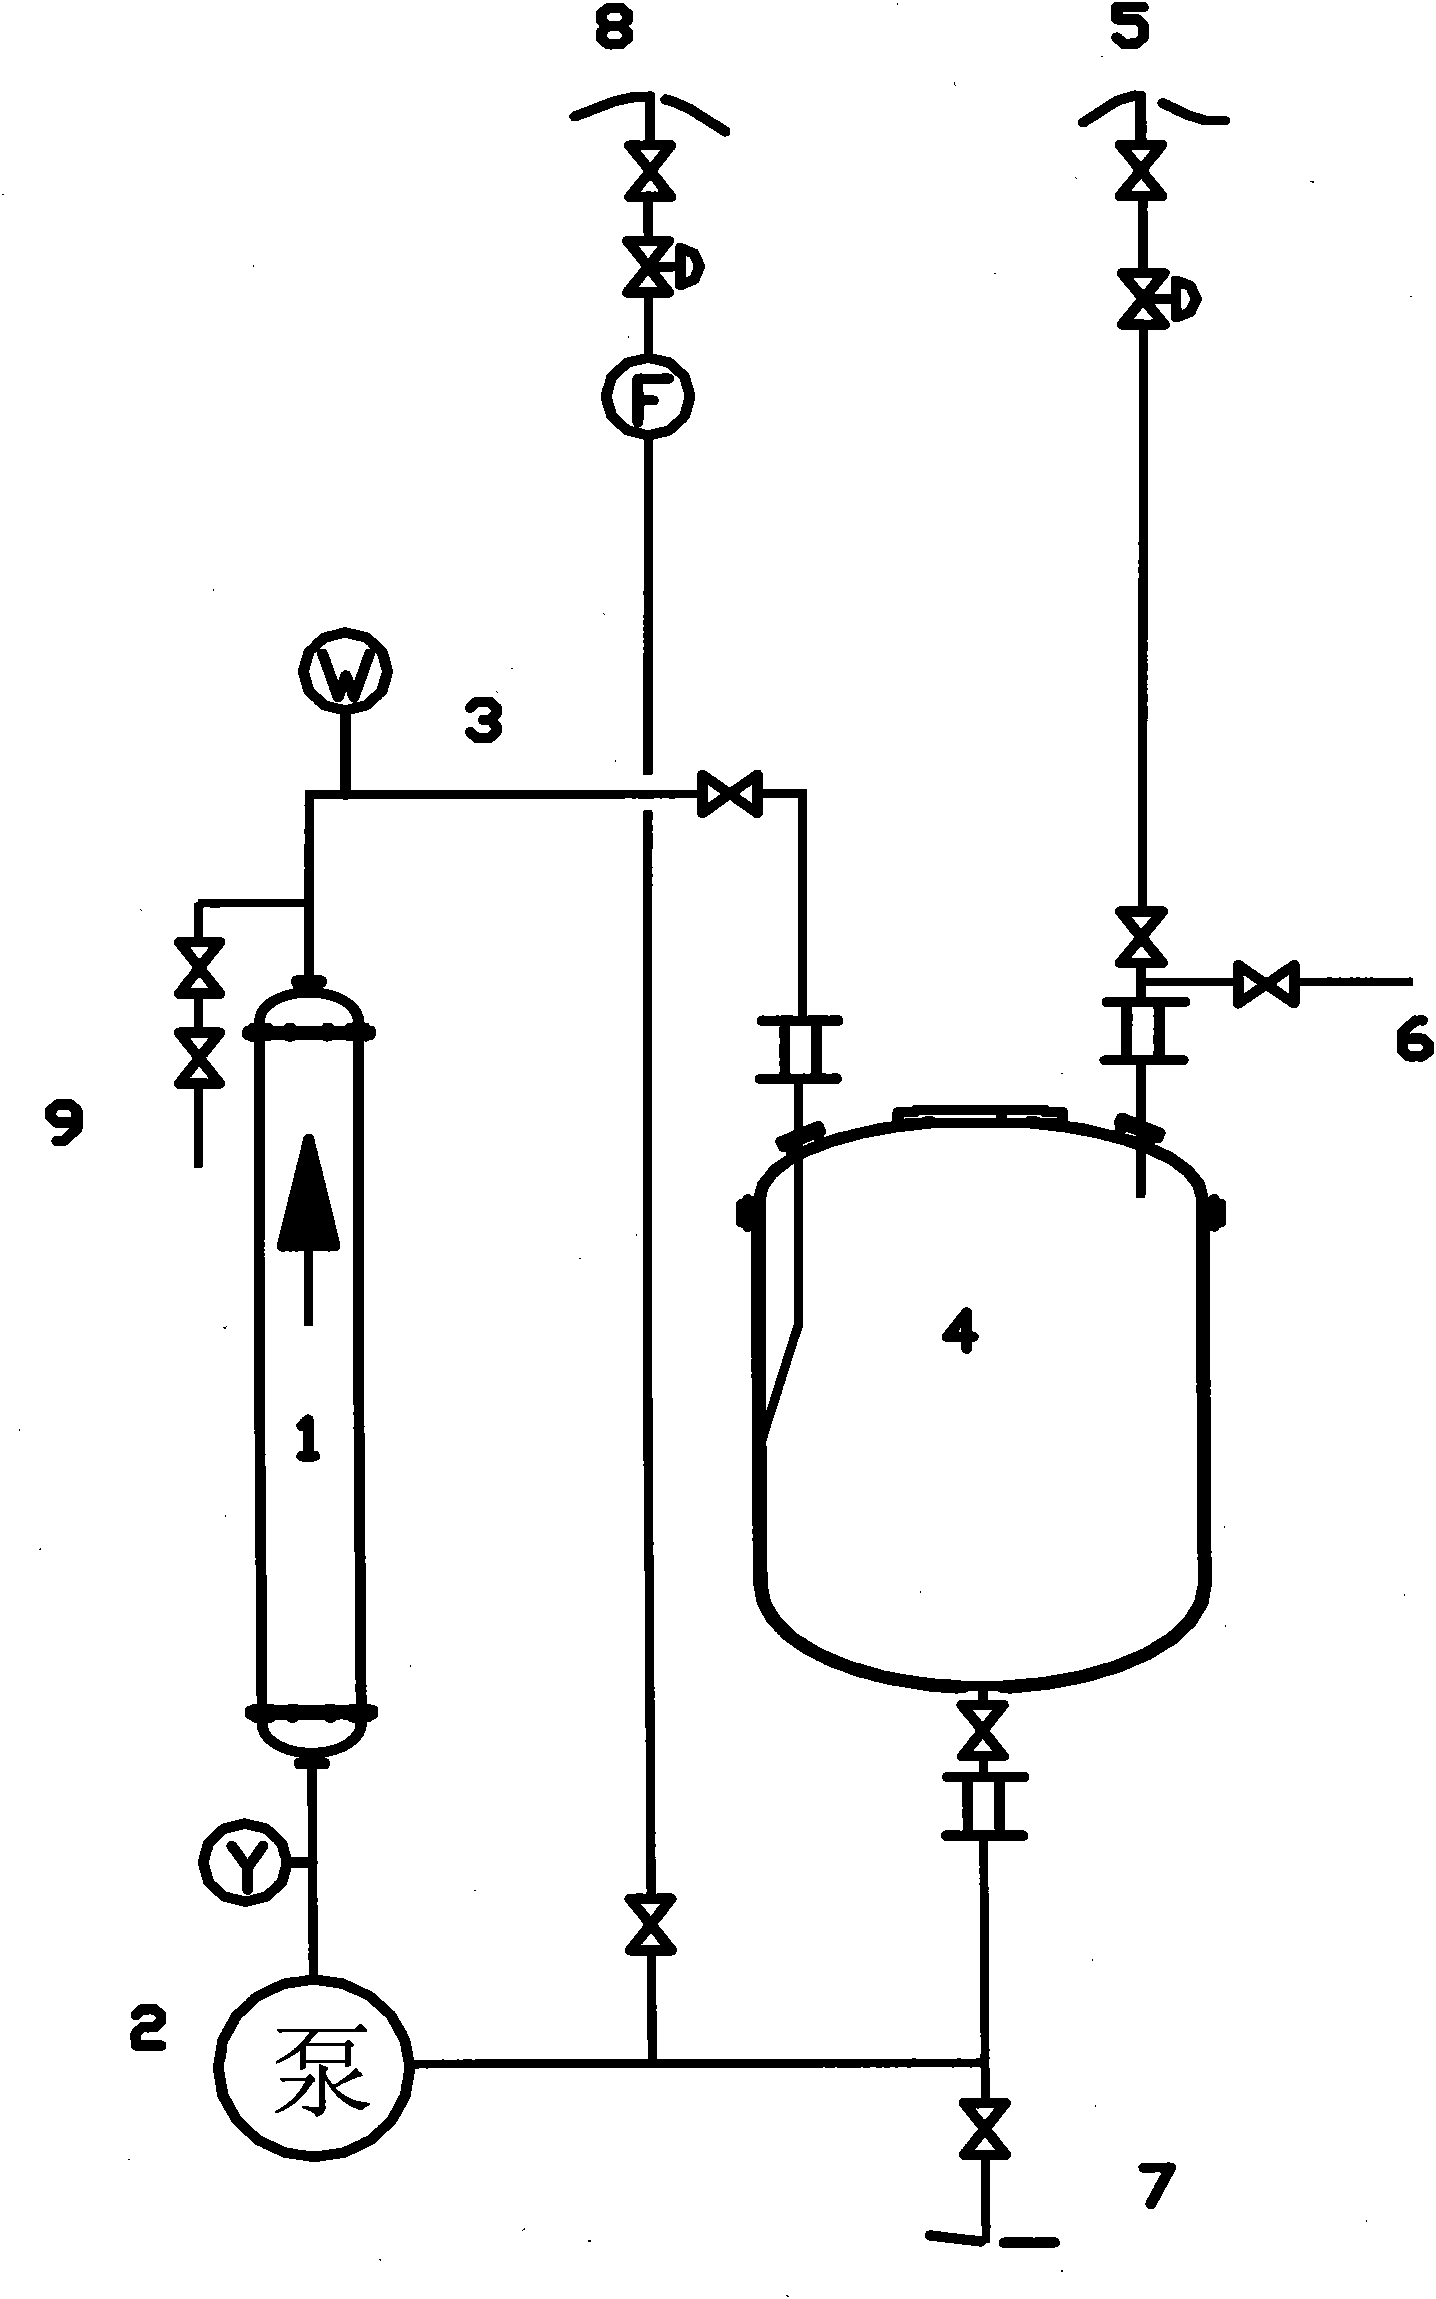 Condensation production process and special device of N-long-chain acyl amino acid salt